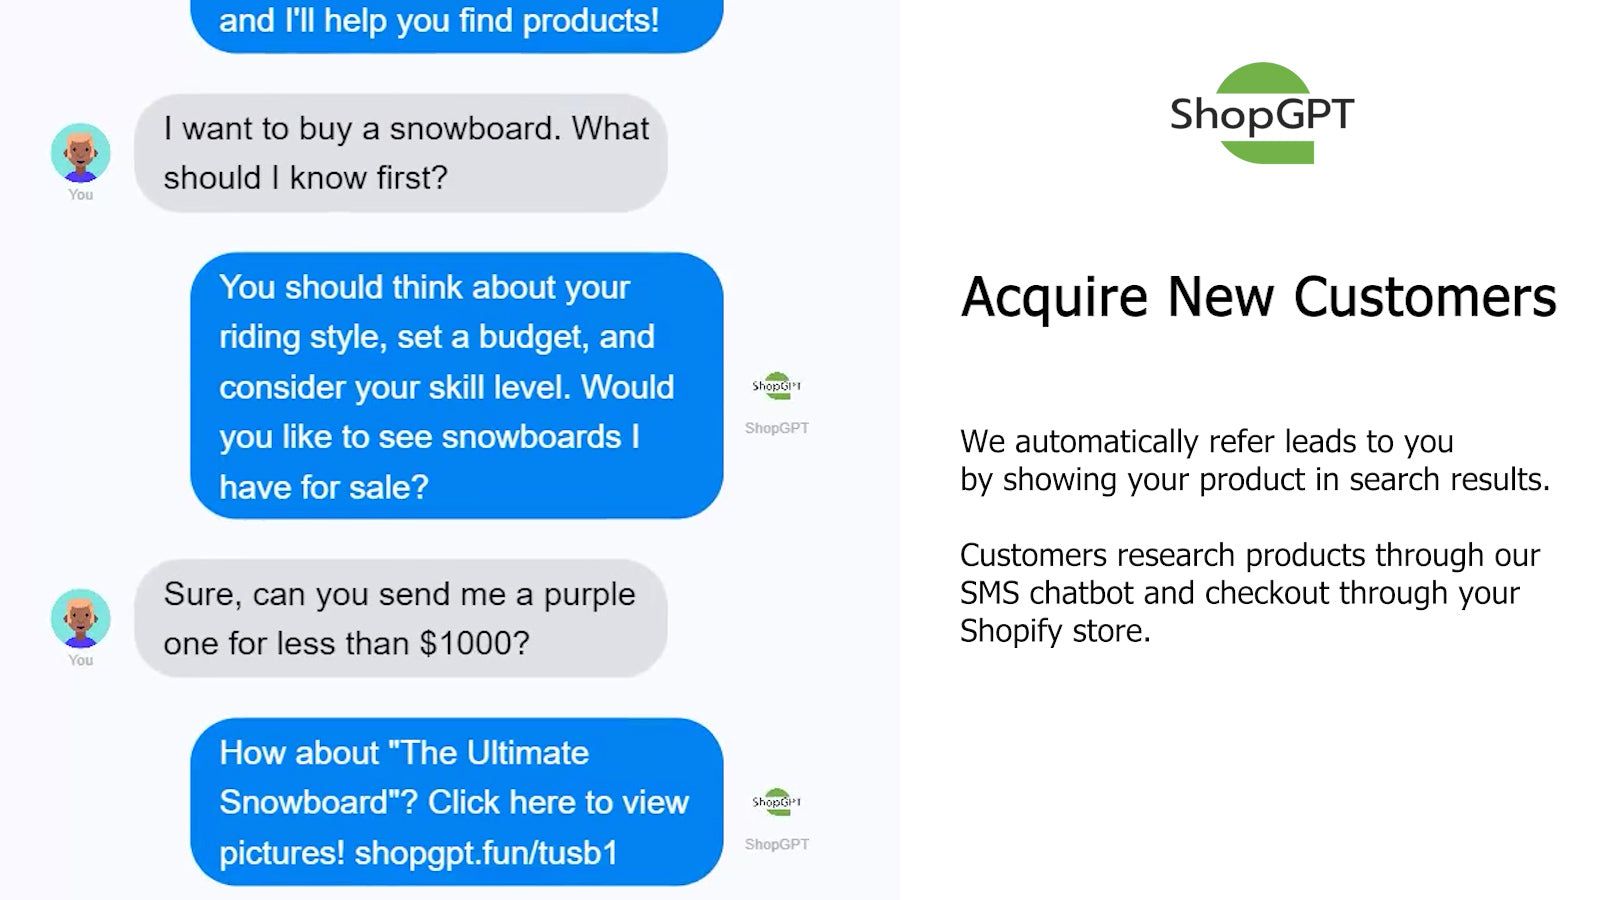 Acquire new customers with text based shopping